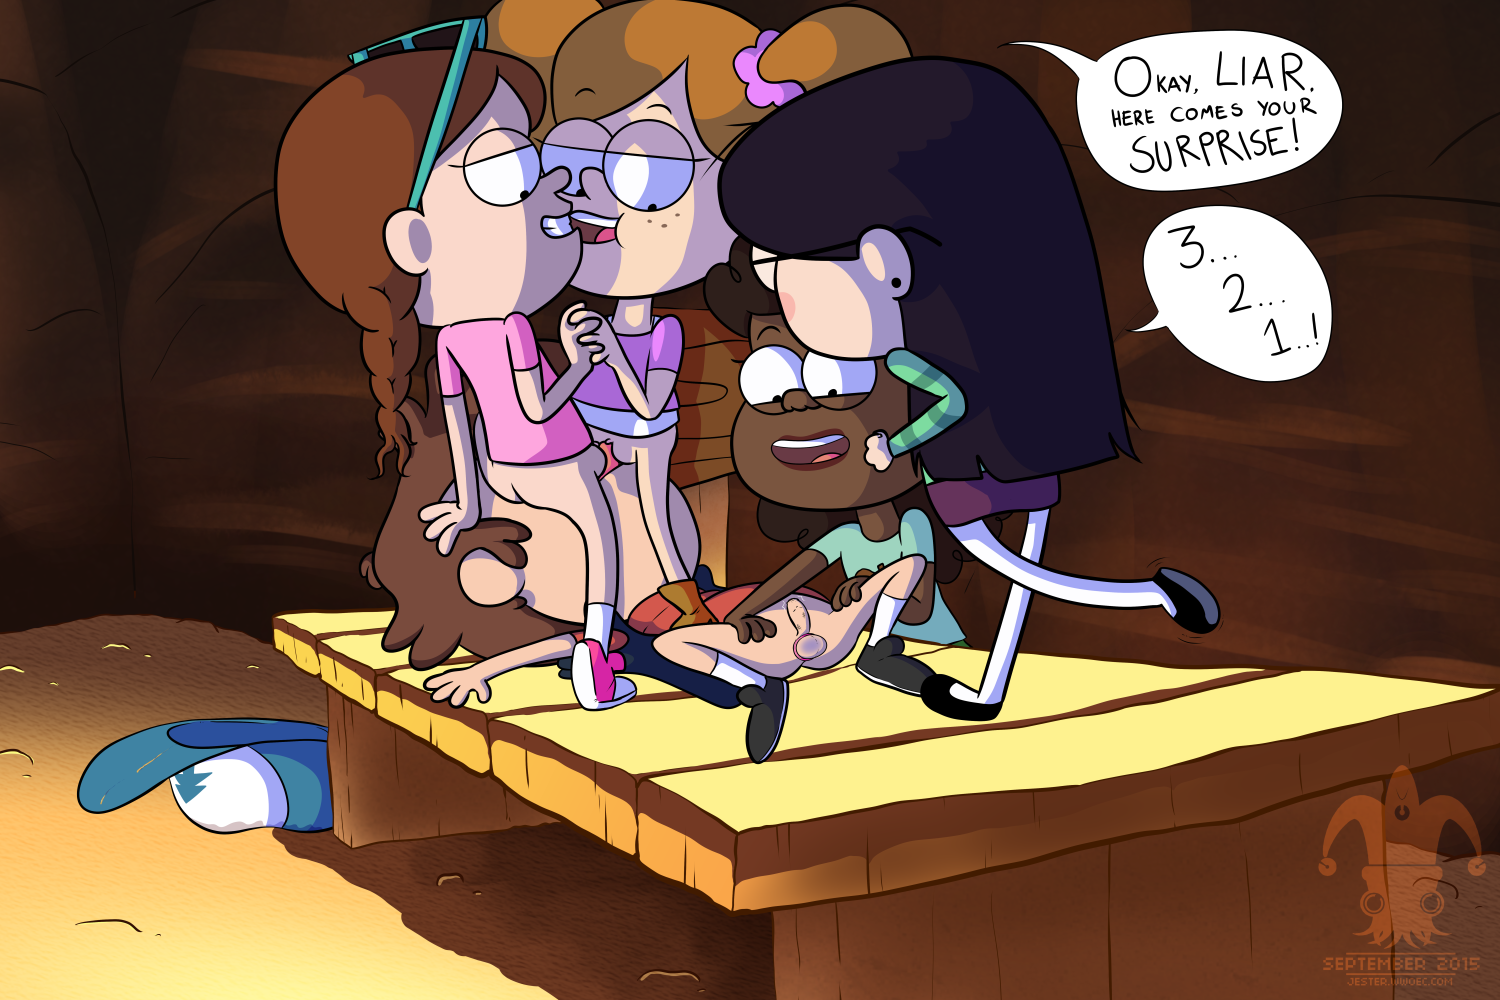 Dipper-The-Disappointment-03_Gotofap_2383236732.png